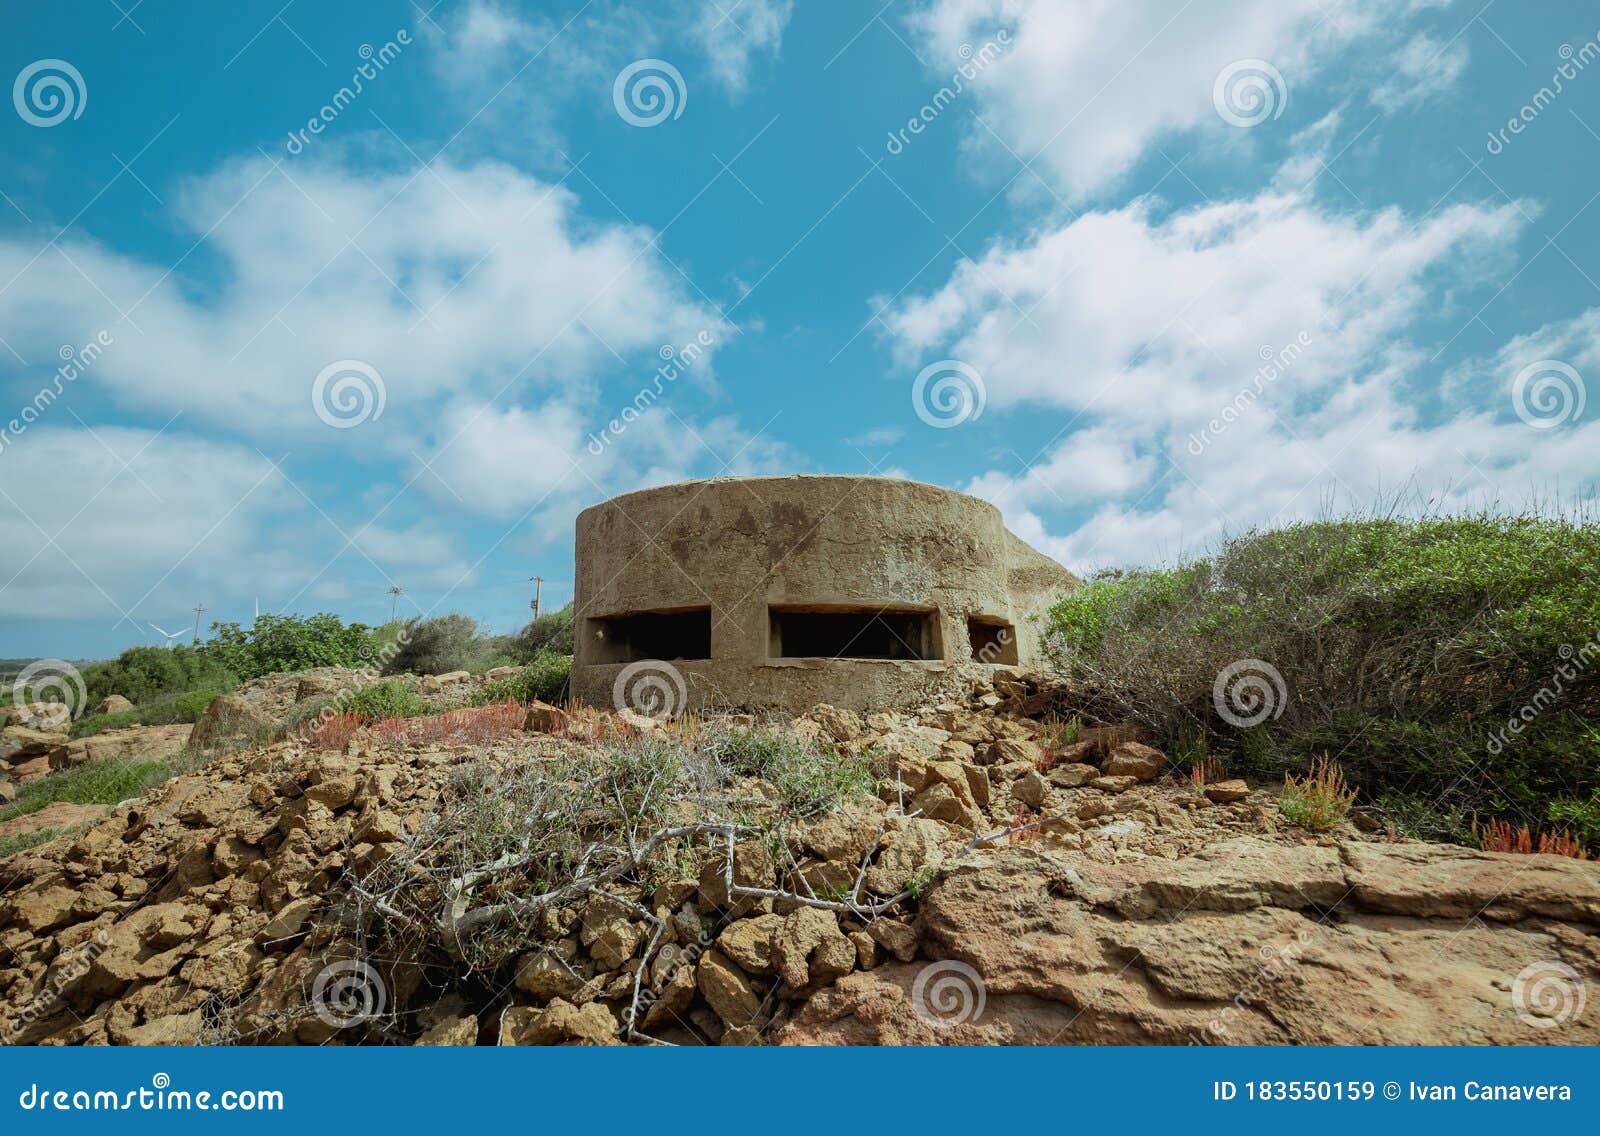 reinforced concrete bunker from the second world war and located on the south-western coast of sardinia